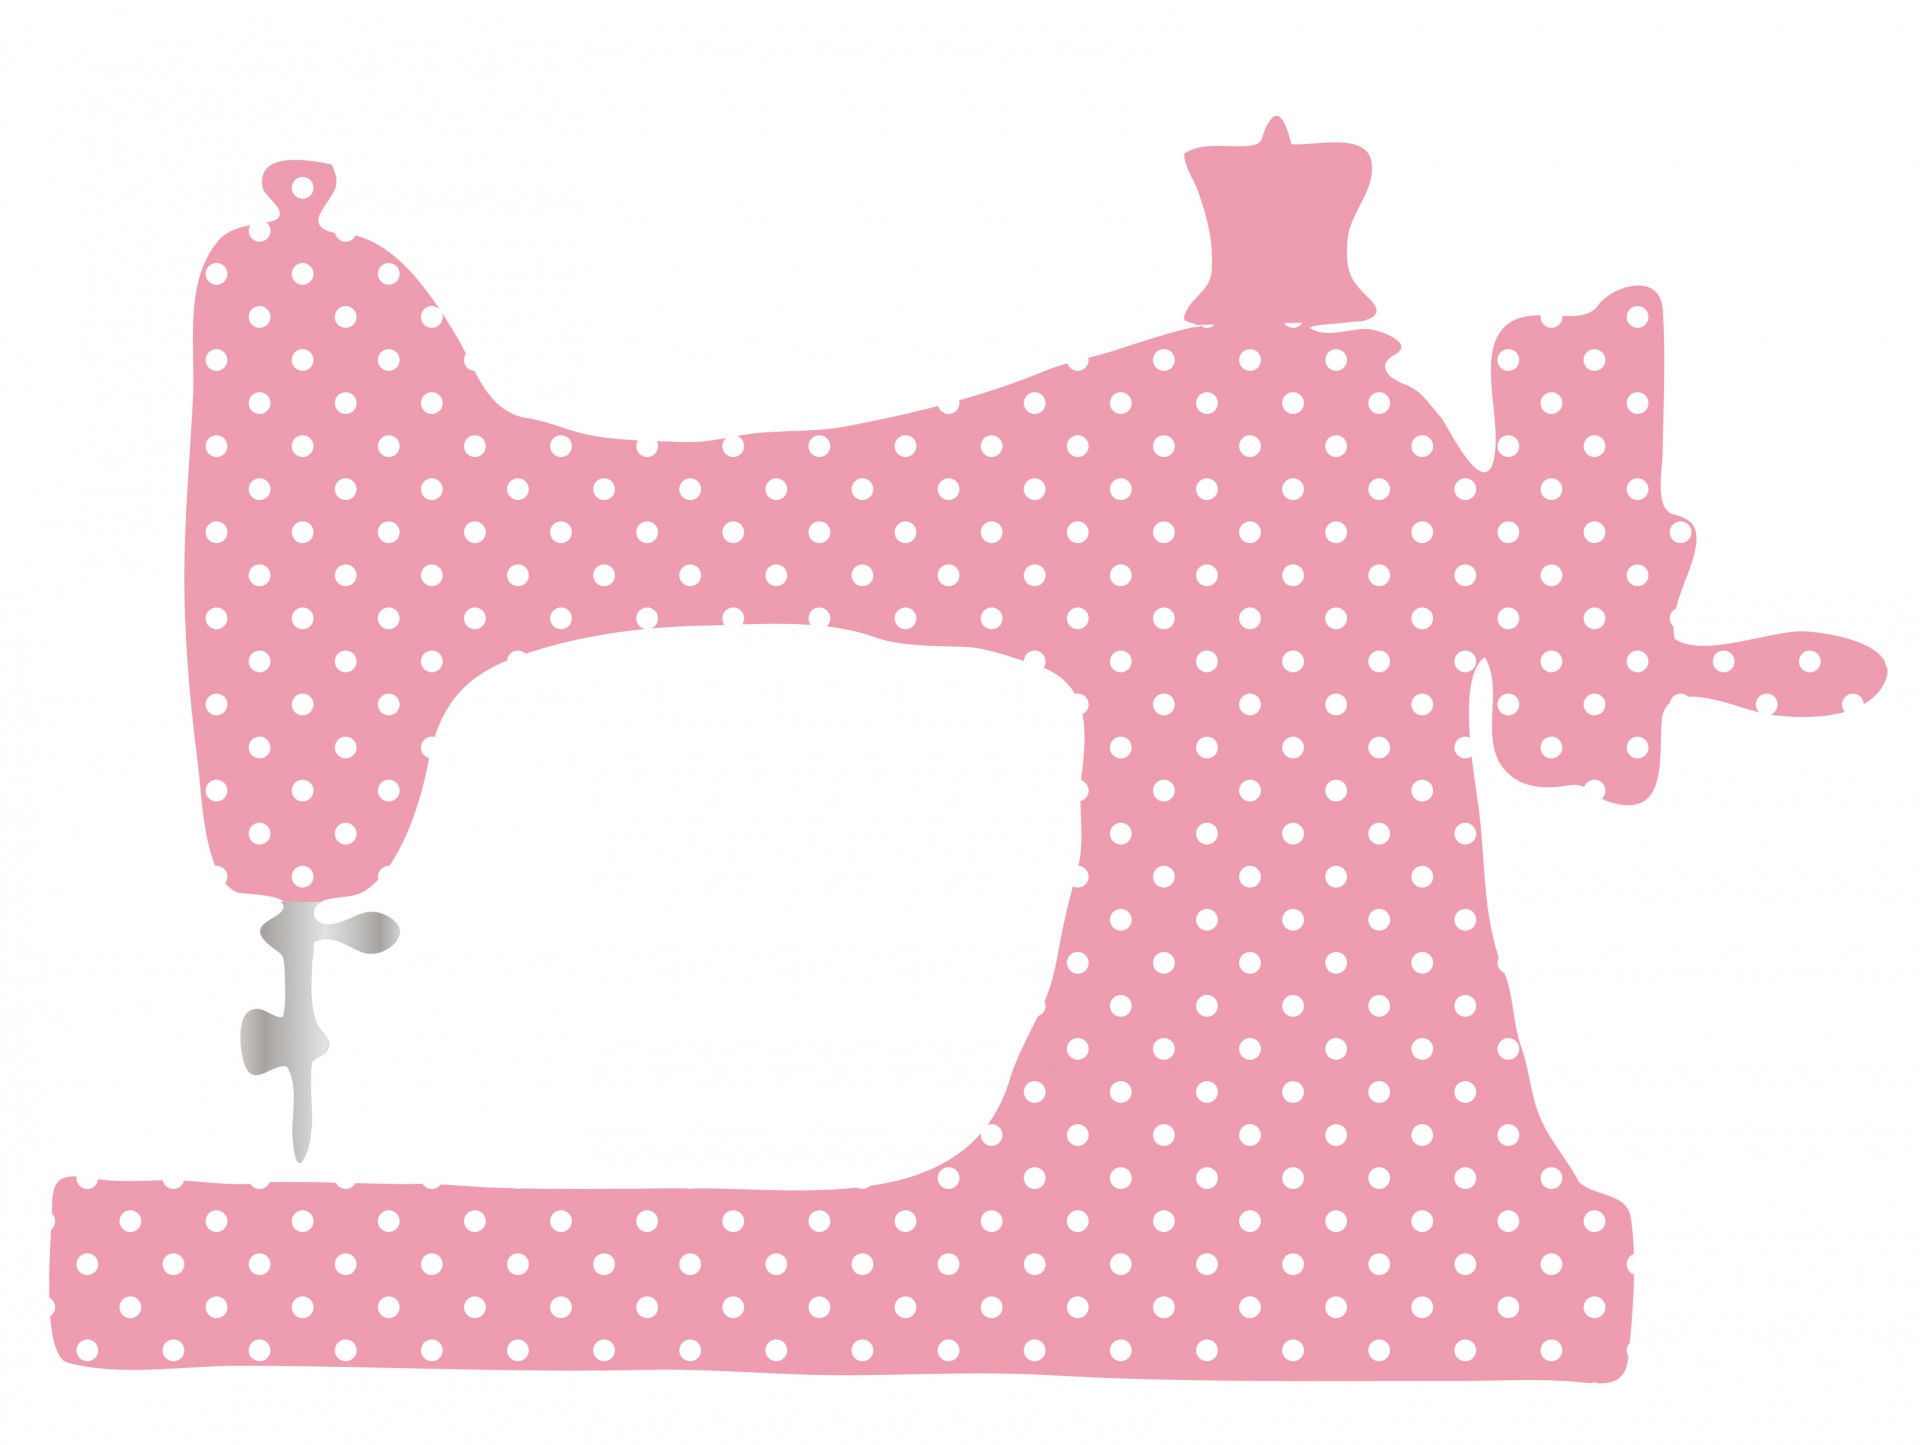 0 ideas about vintage sewing rooms on cliparts